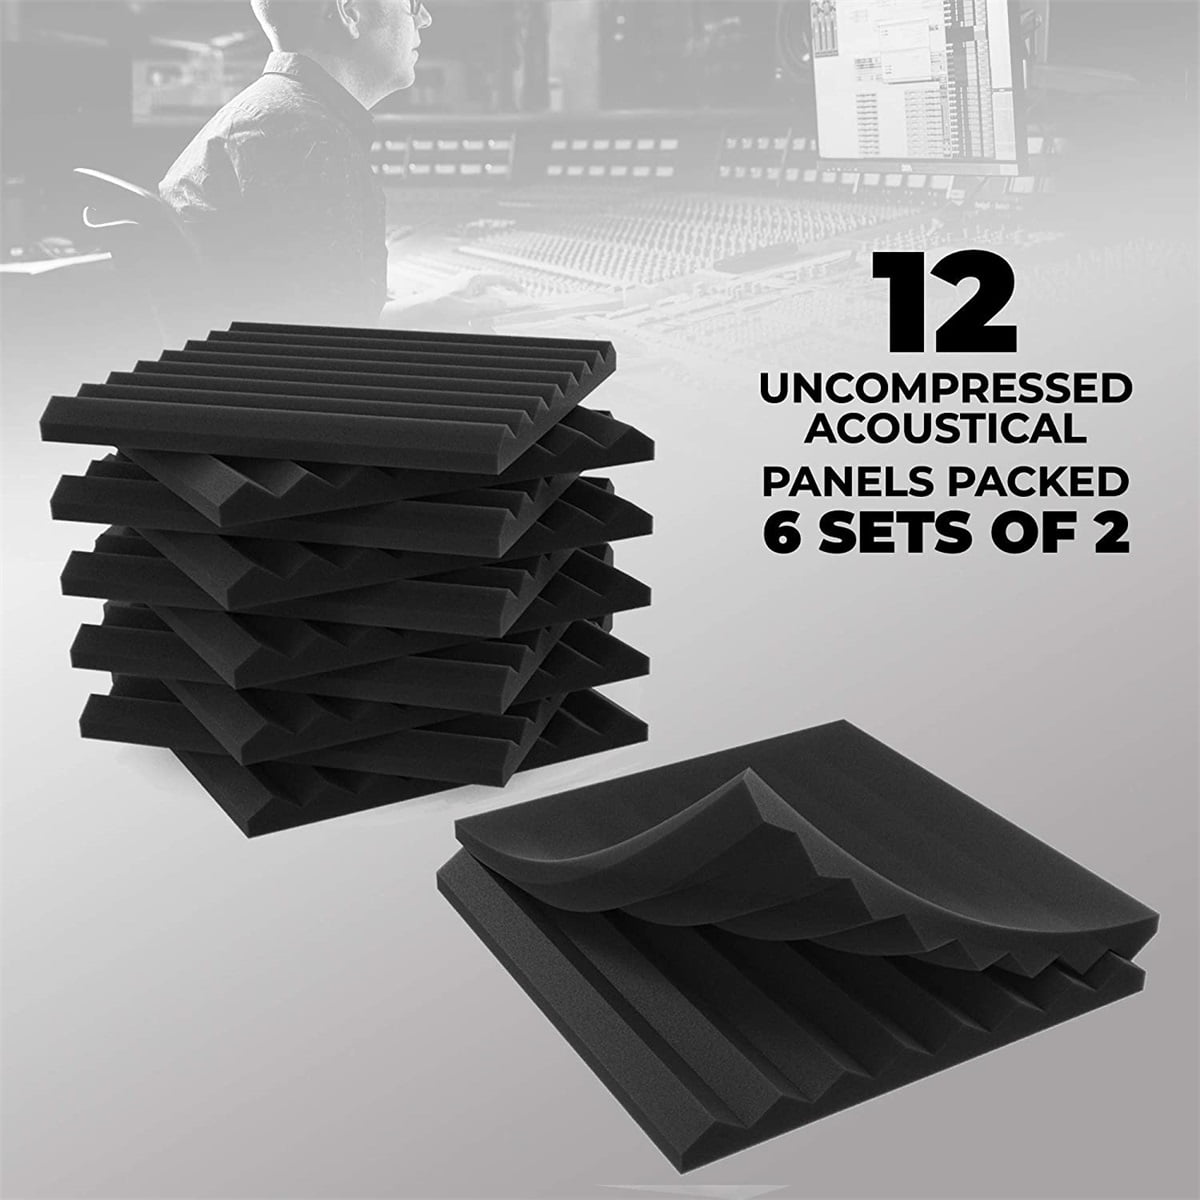 1 X 12 X 12 96PACK, BLACK 96 Pack Acoustic Panels Soundproof Foam for Walls Sound Absorbing Panels Soundproofing Panels Wedge for Home Studio Ceiling Black 